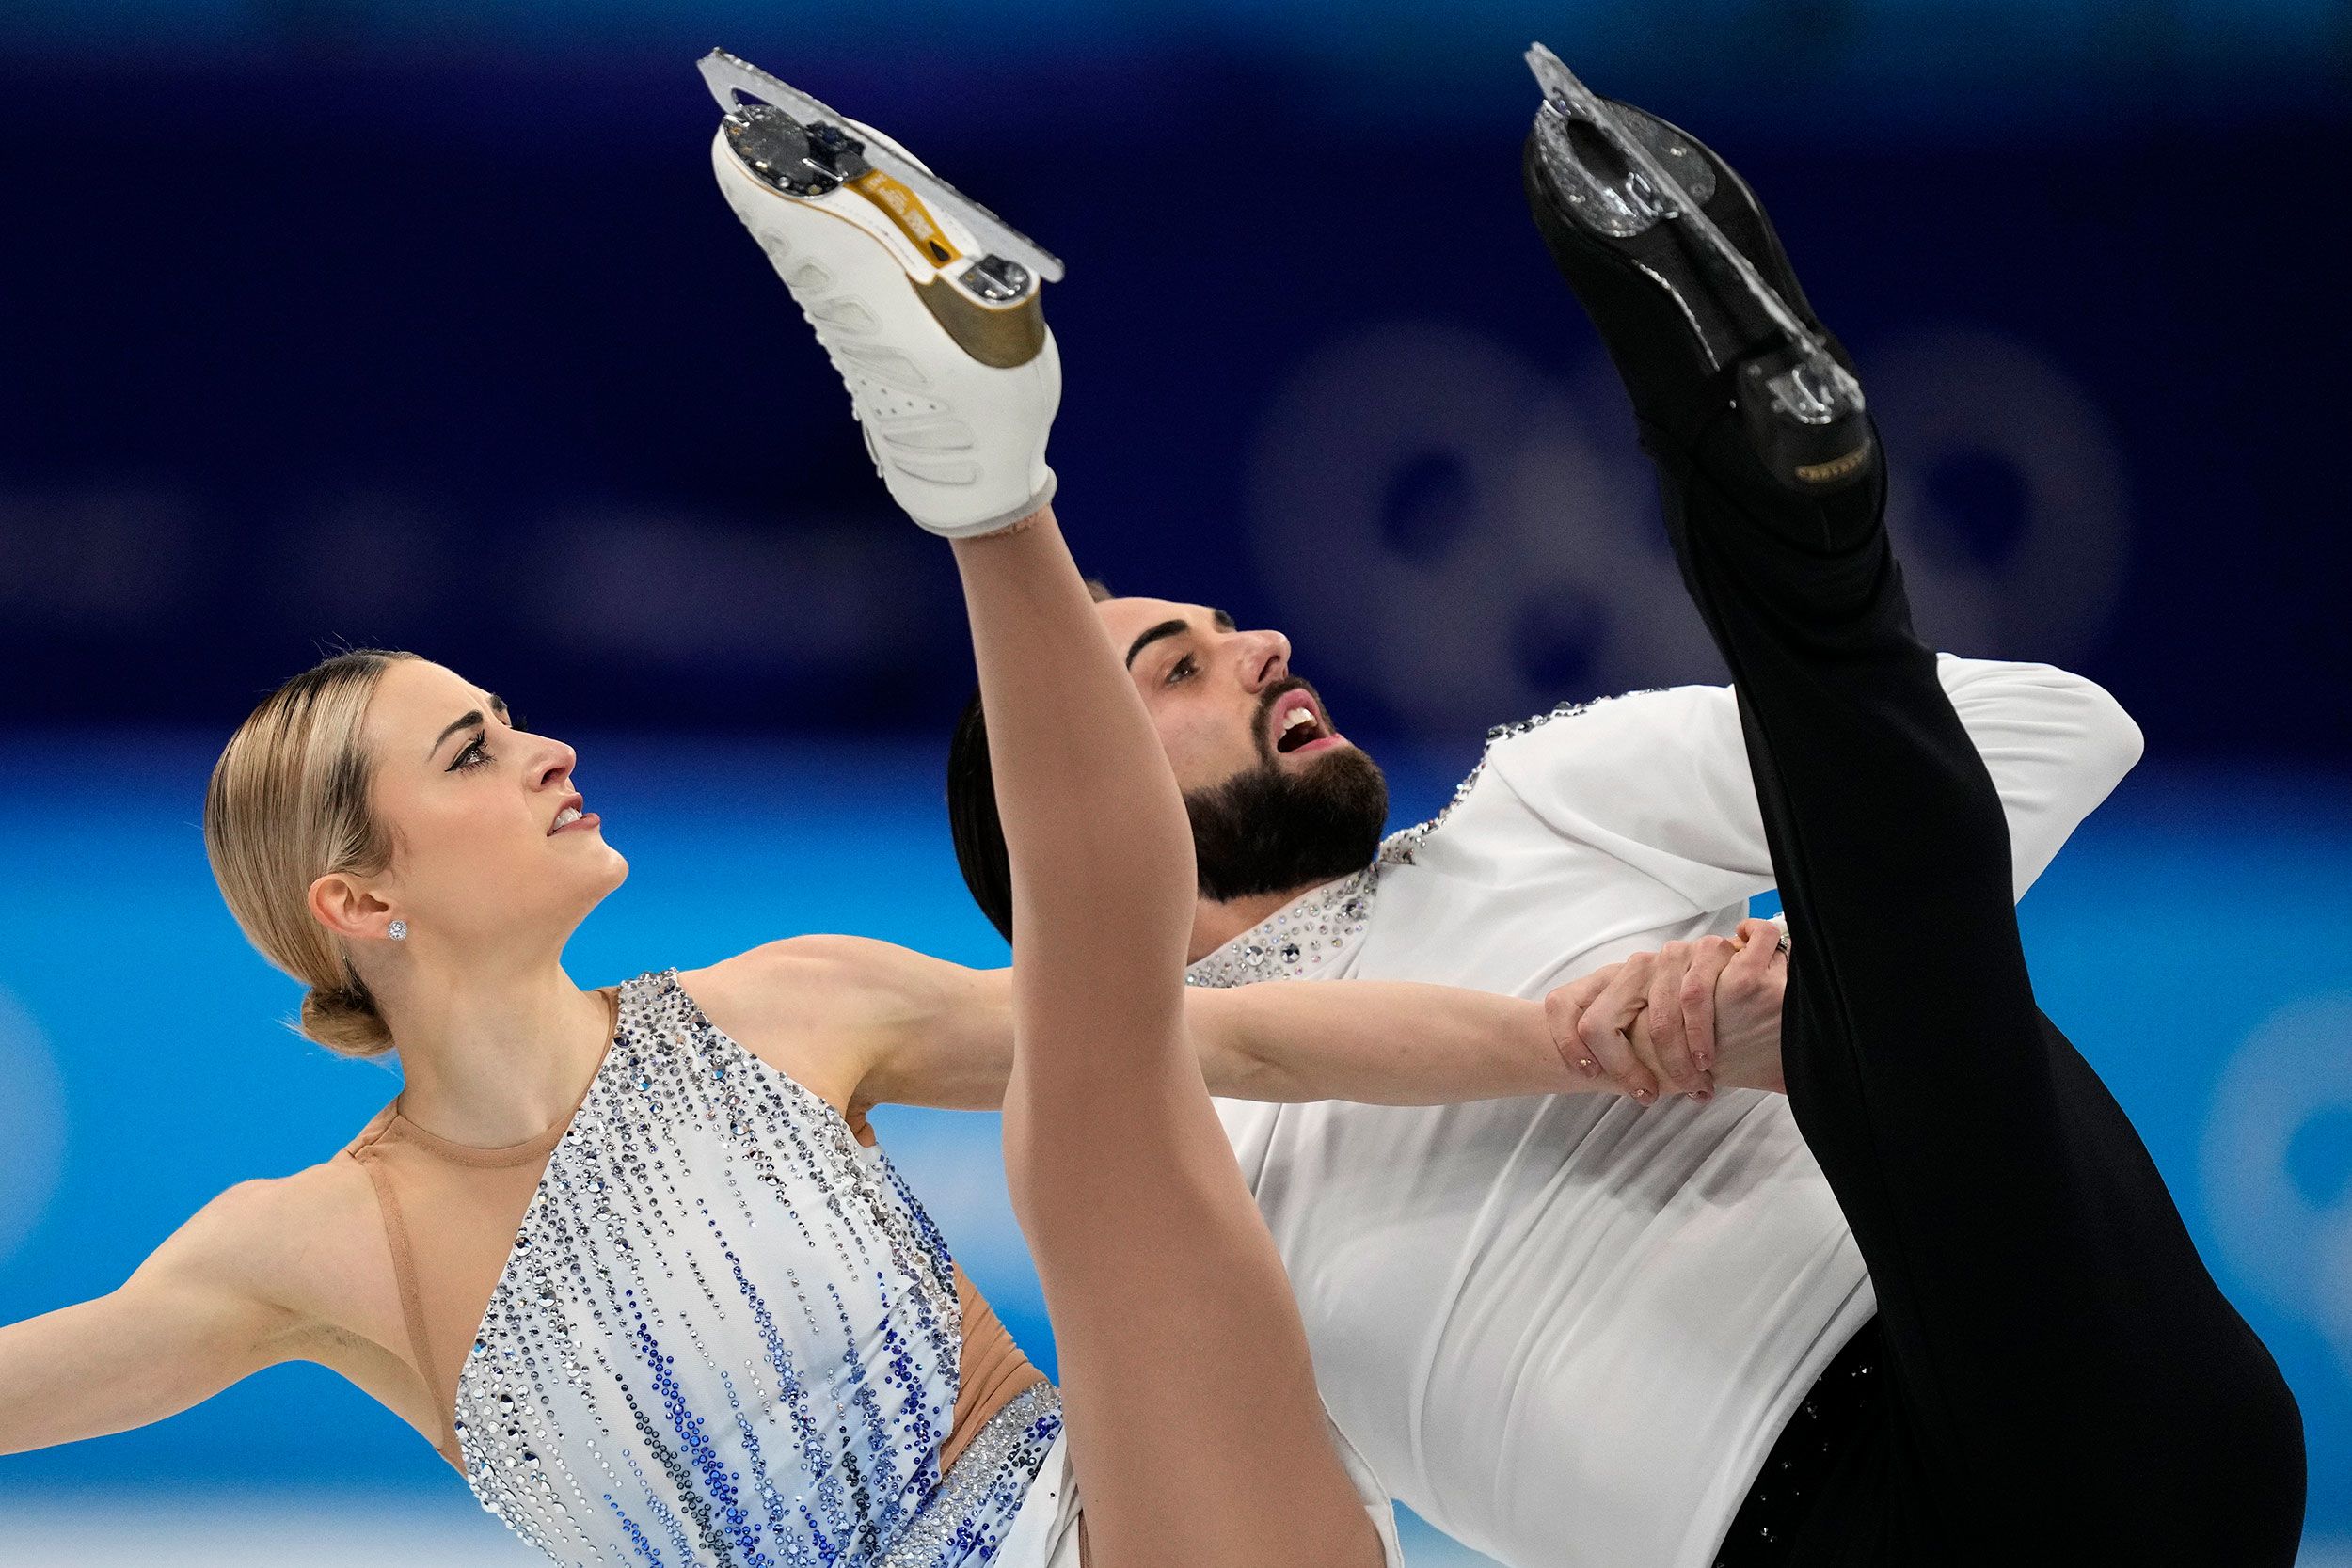 Best images from Sunday at Winter Olympics